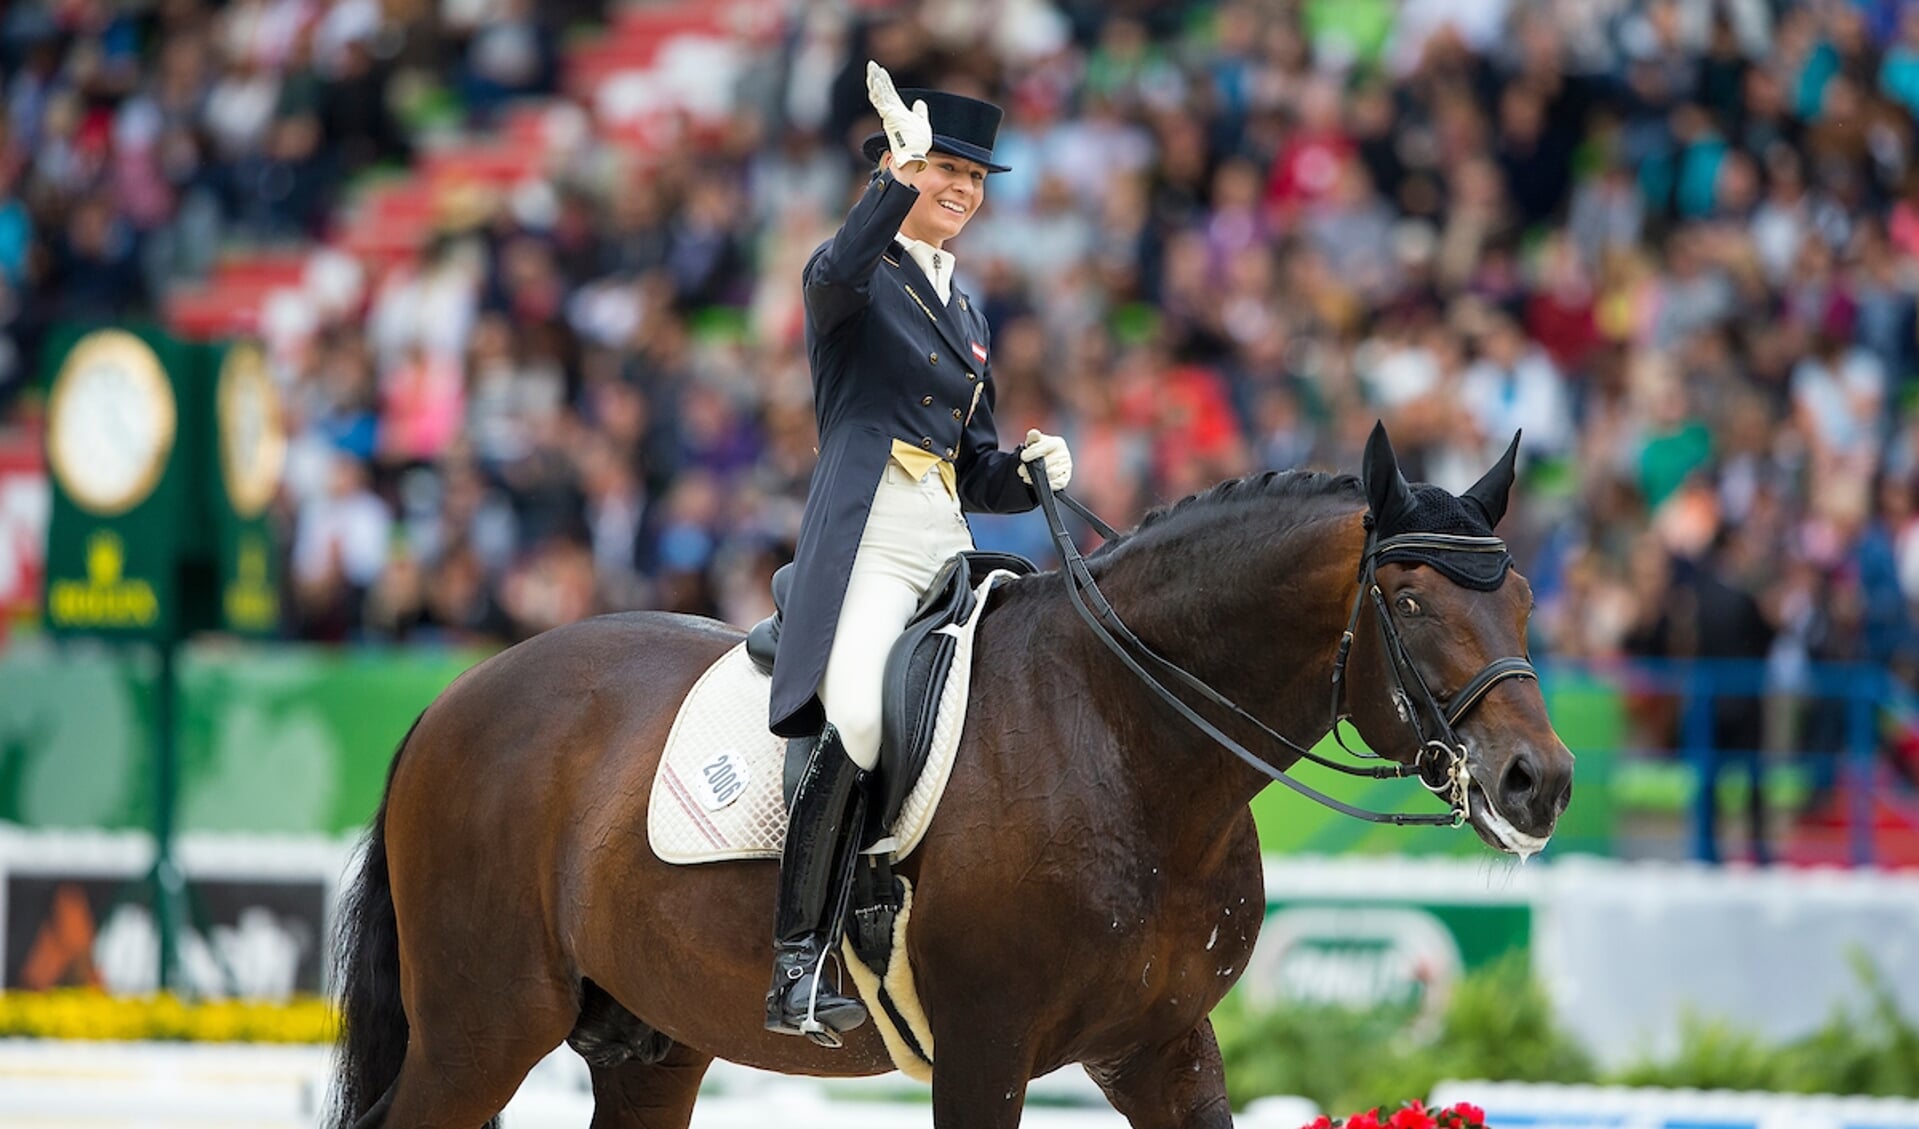 Victoria Max Theurer - Augustin OLD
Alltech FEI World Equestrian Games™ 2014 - Normandy, France.
© DigiShots